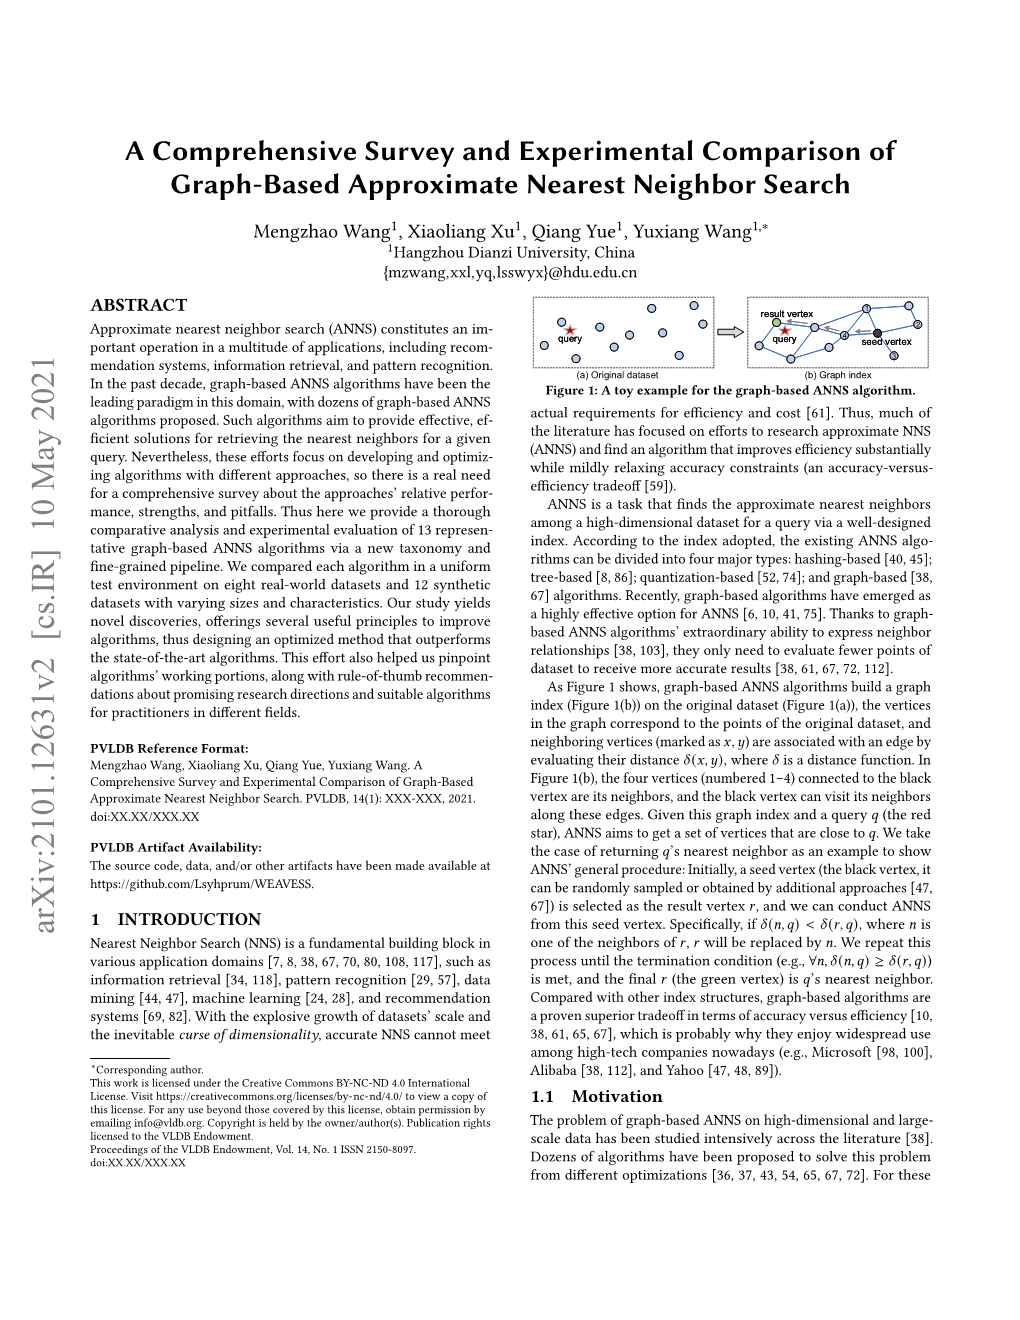 A Comprehensive Survey and Experimental Comparison of Graph-Based Approximate Nearest Neighbor Search